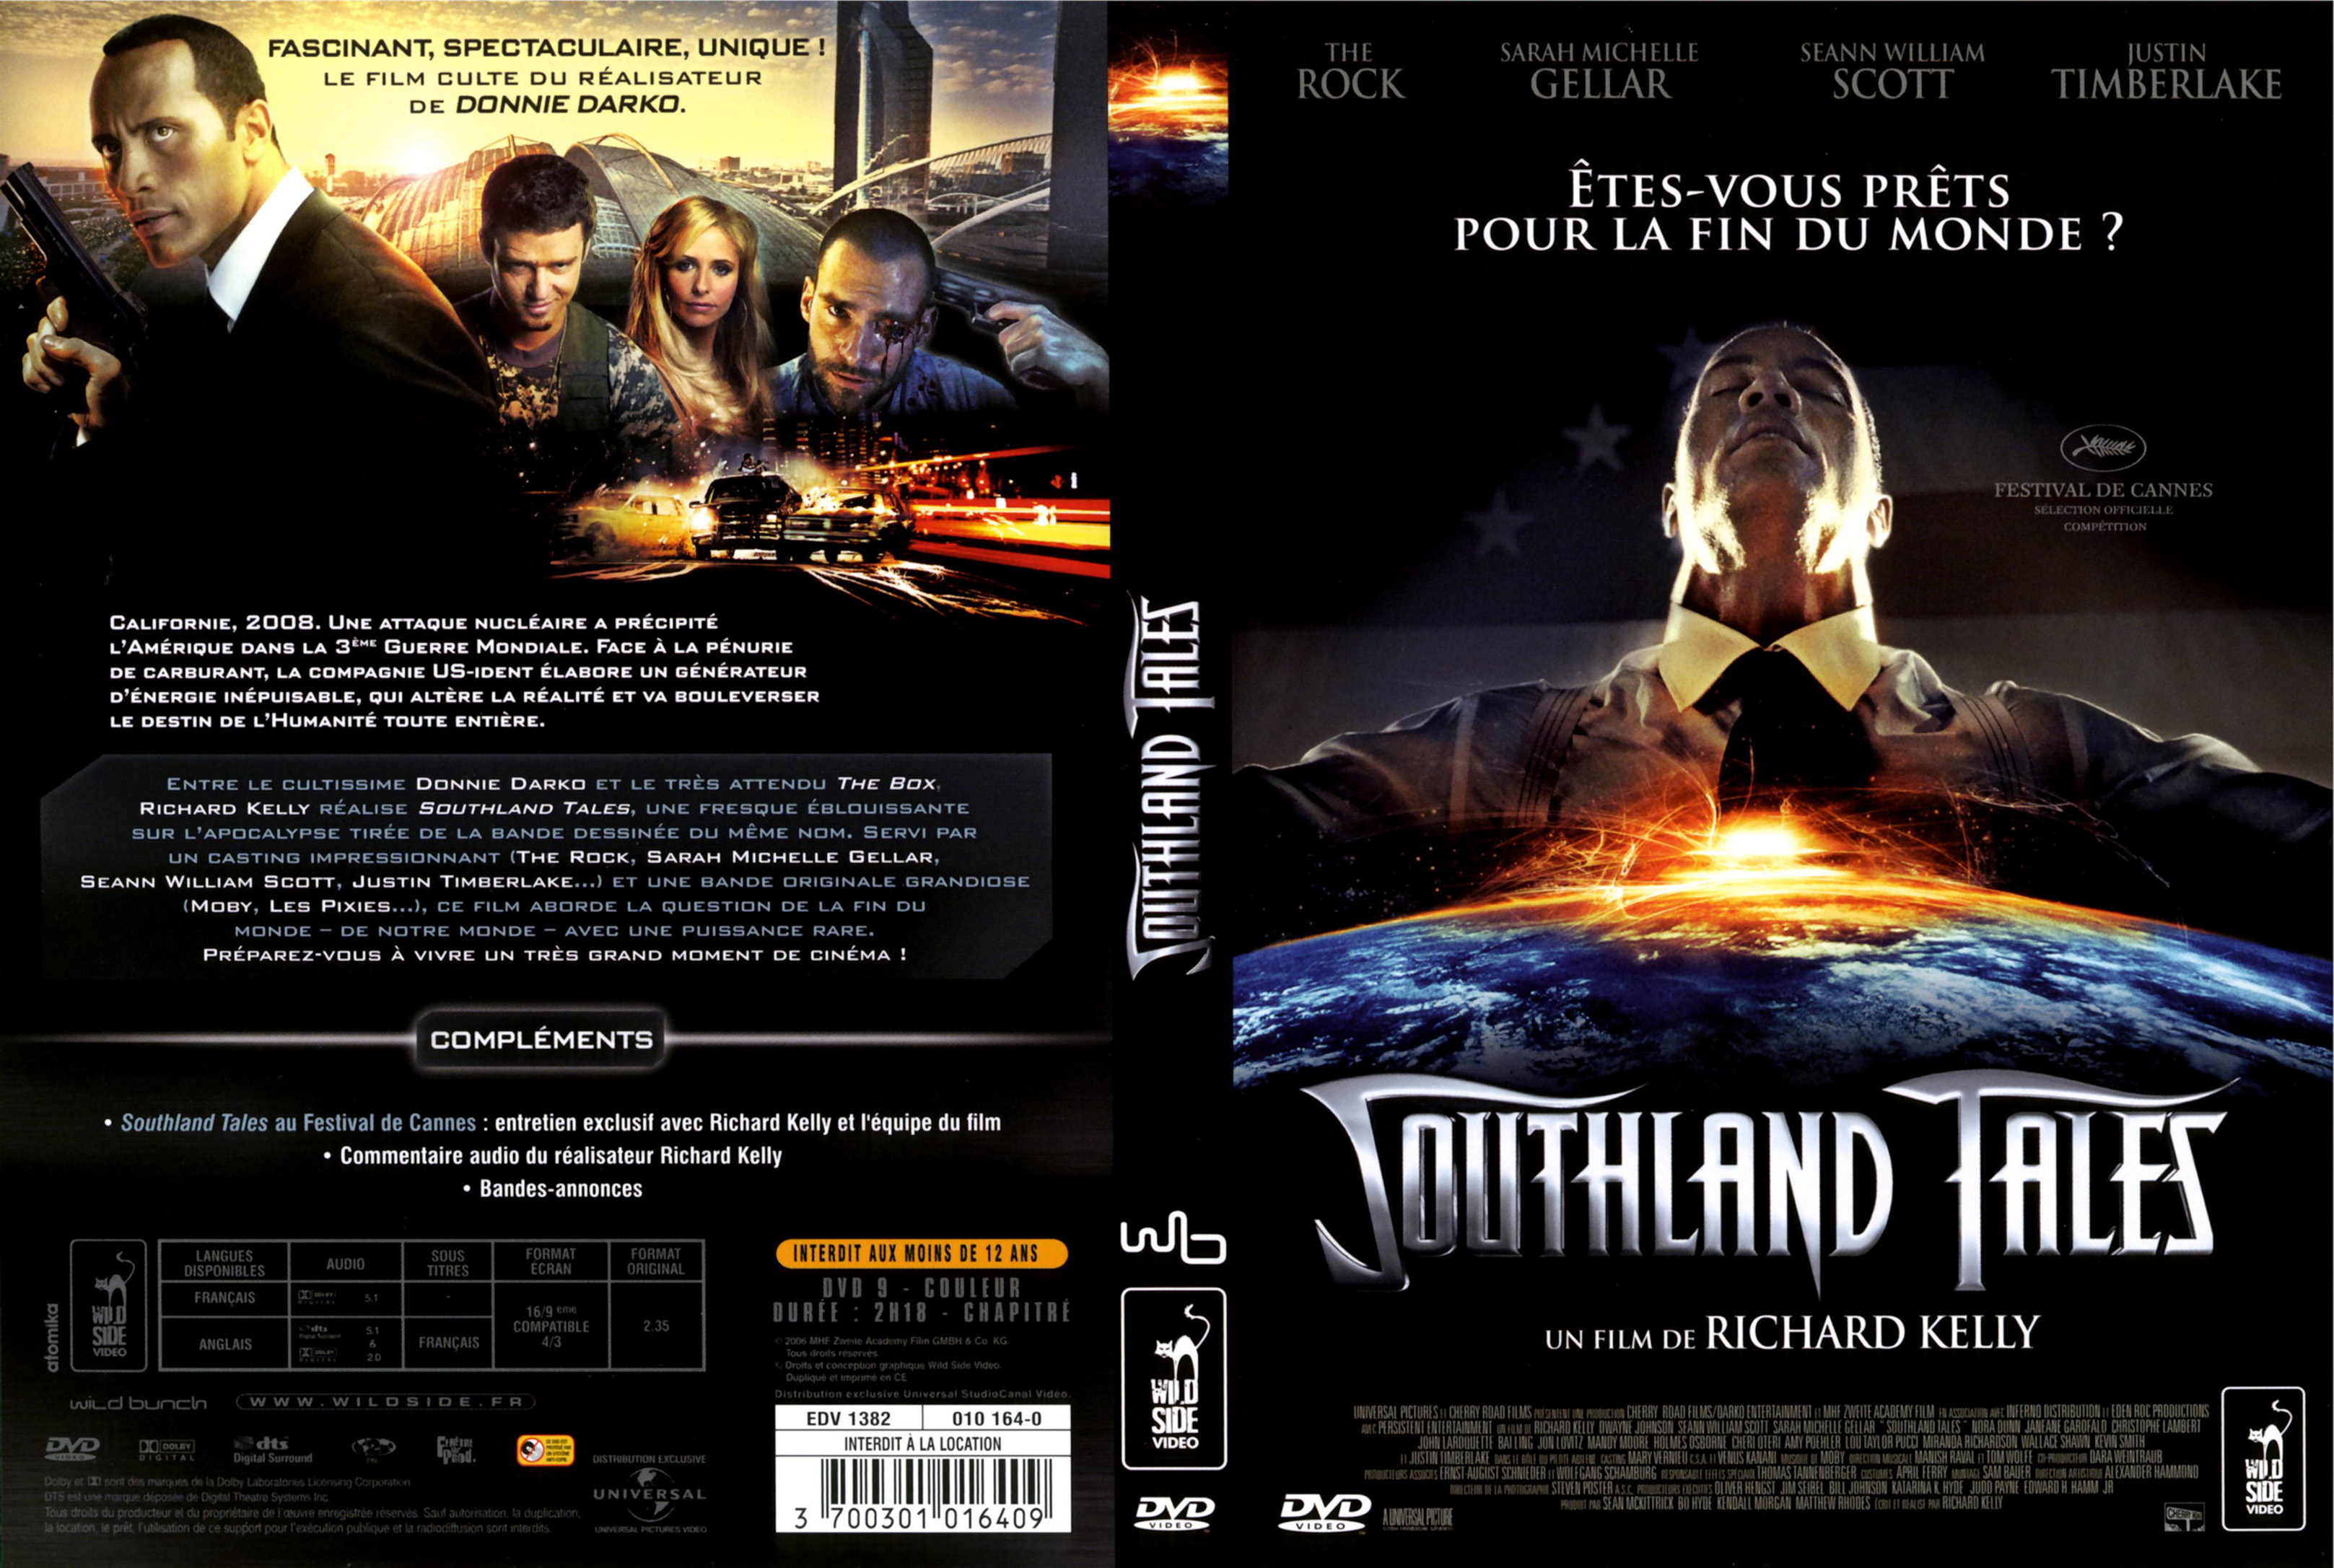 Jaquette DVD Southland tales